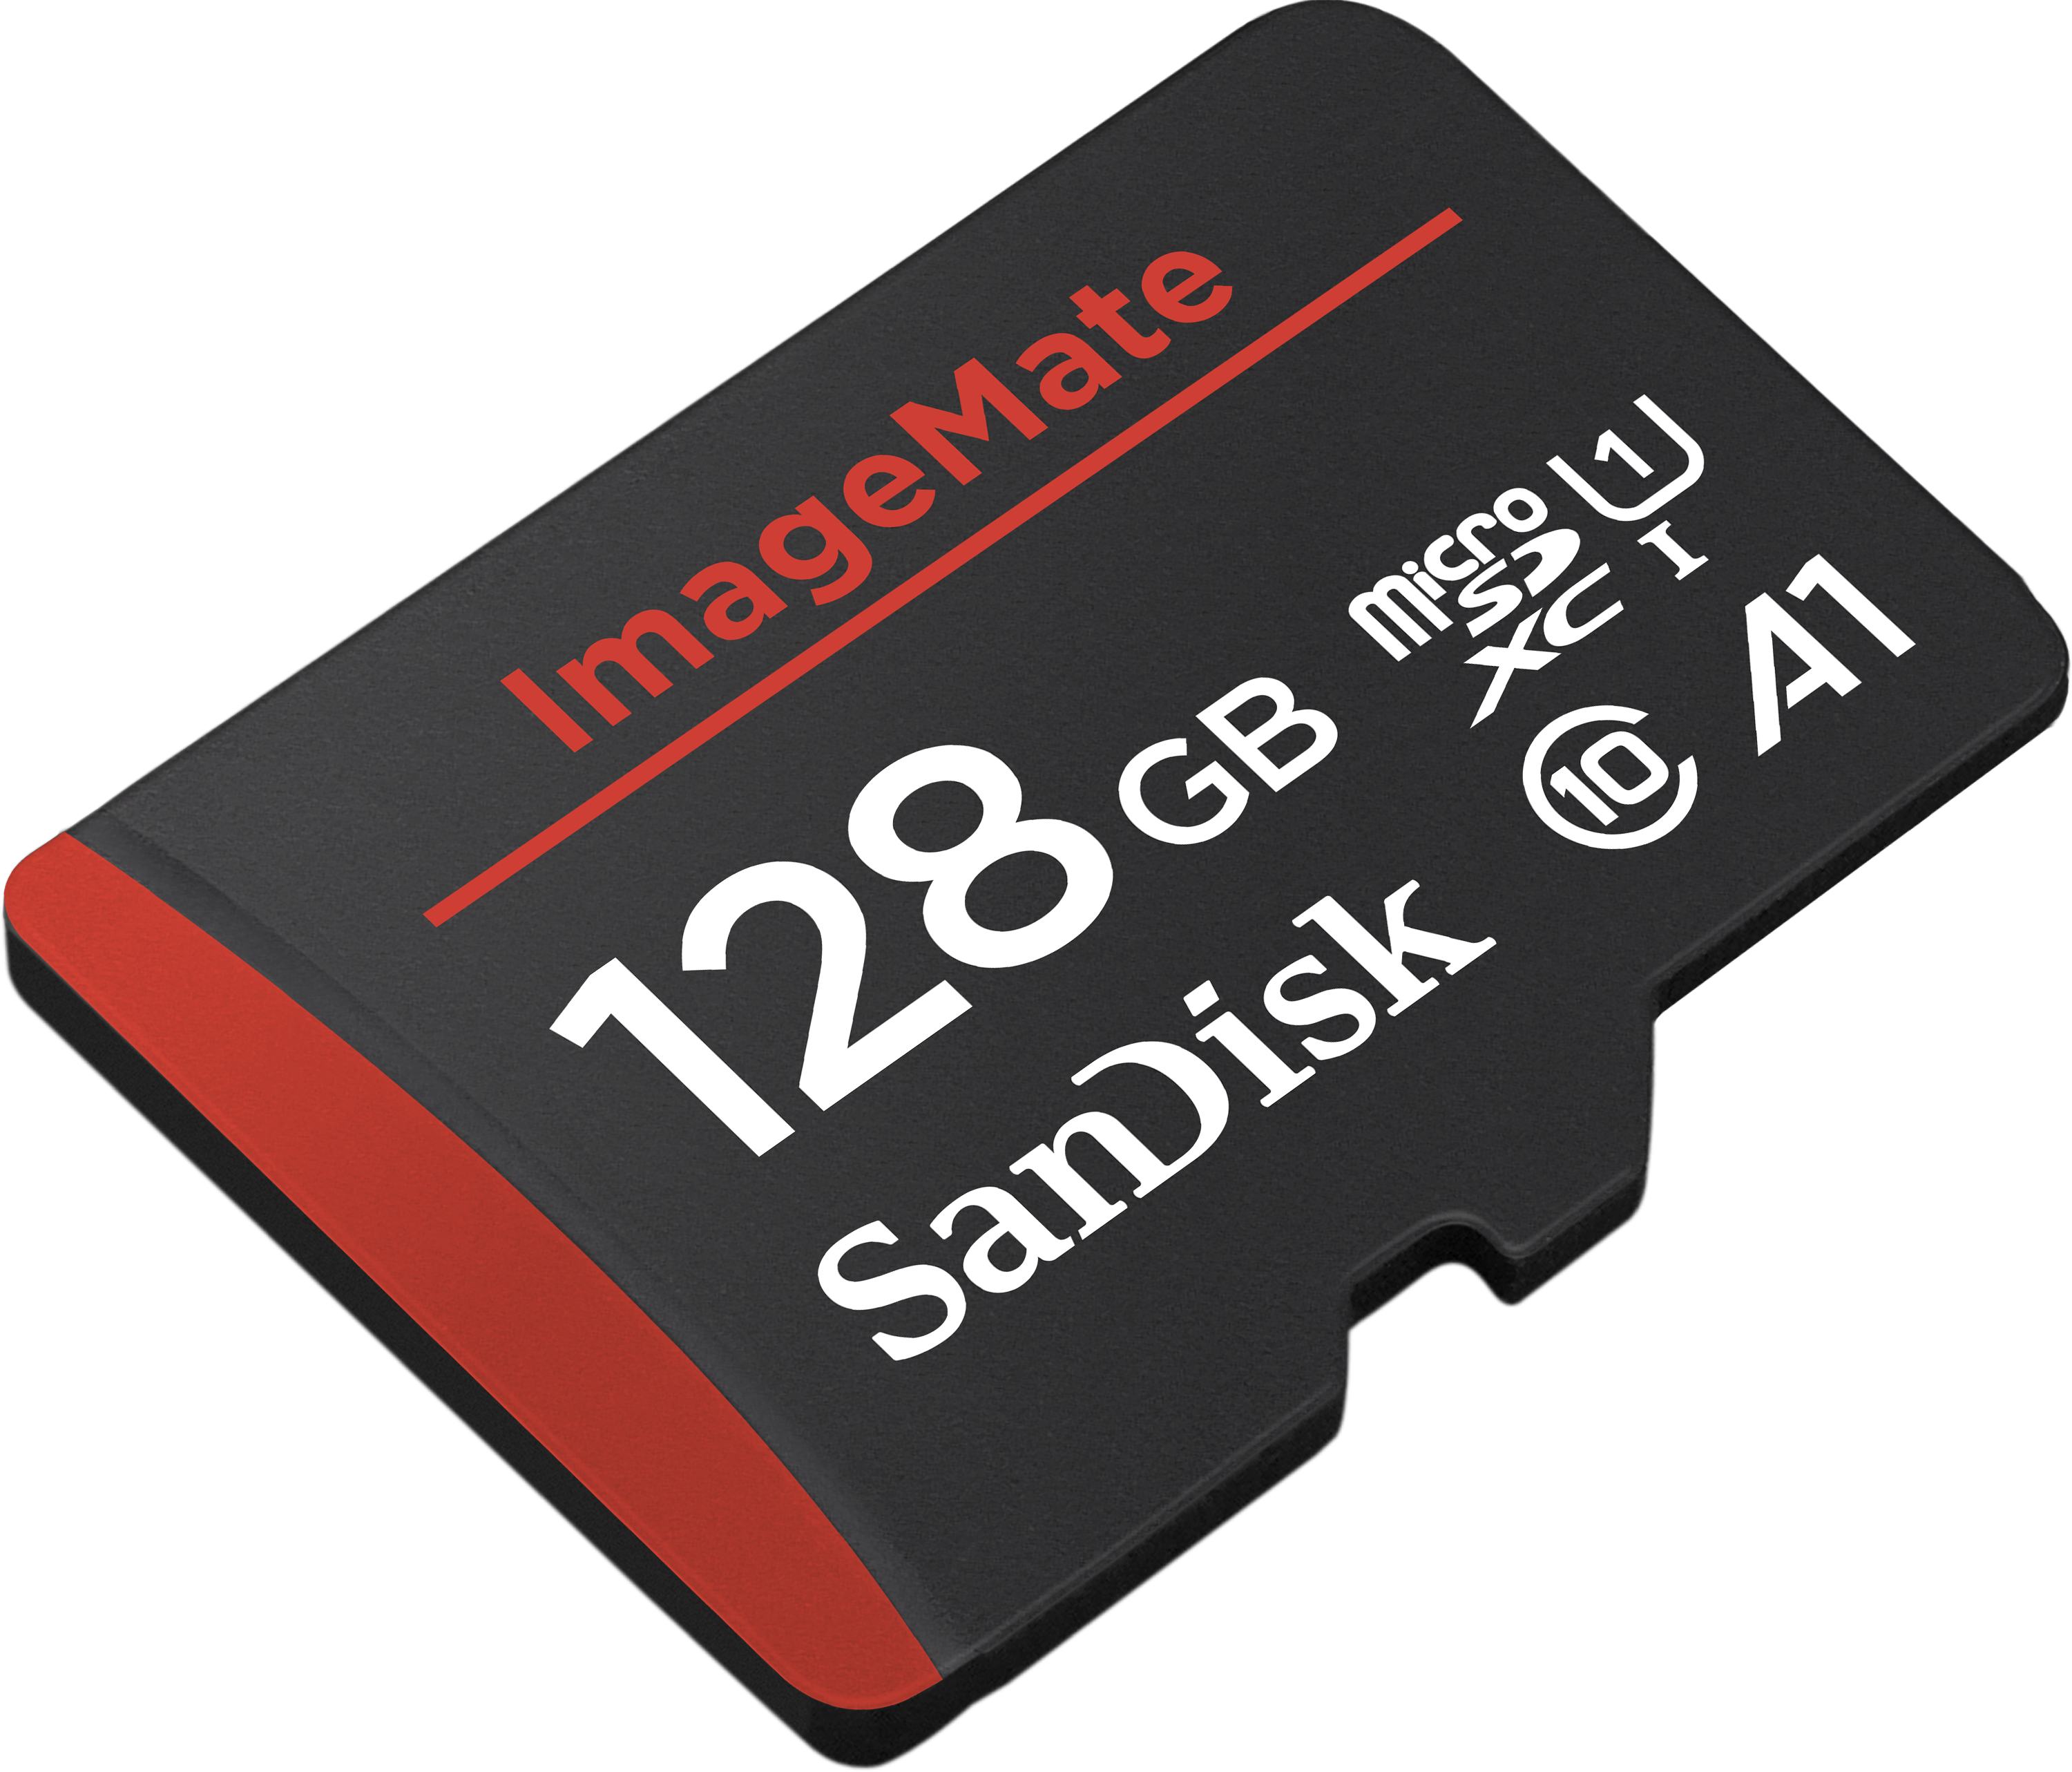 SanDisk 128 GB ImageMate microSDXC UHS-1 Memory Card with Adapter - C10, U1, Full HD, A1 Micro SD Card - image 2 of 5